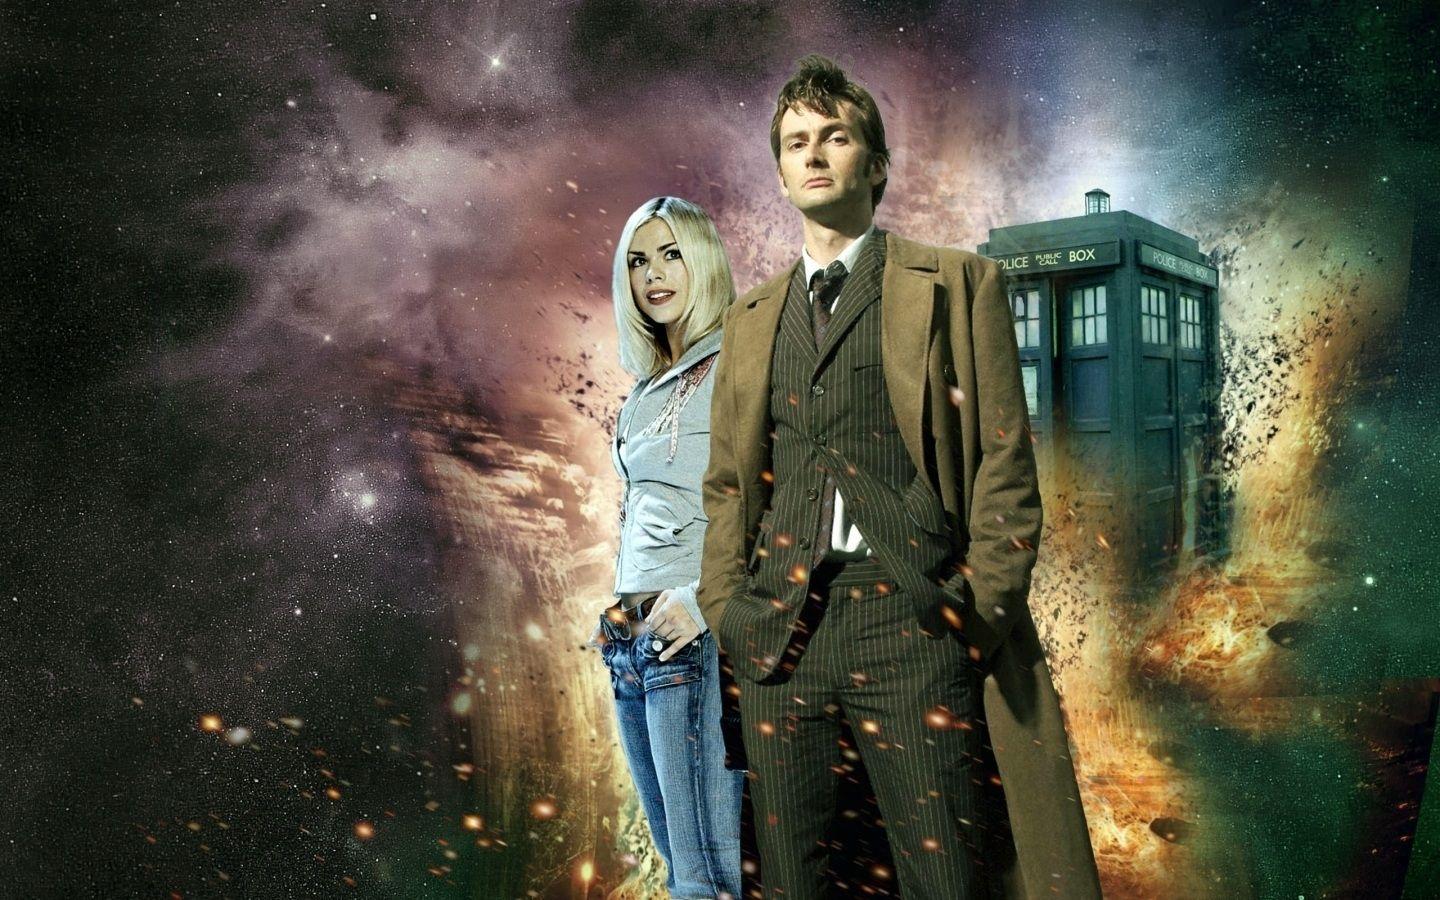 Best Doctor Who David Tennant Wallpaper FULL HD 1920×1080 For PC